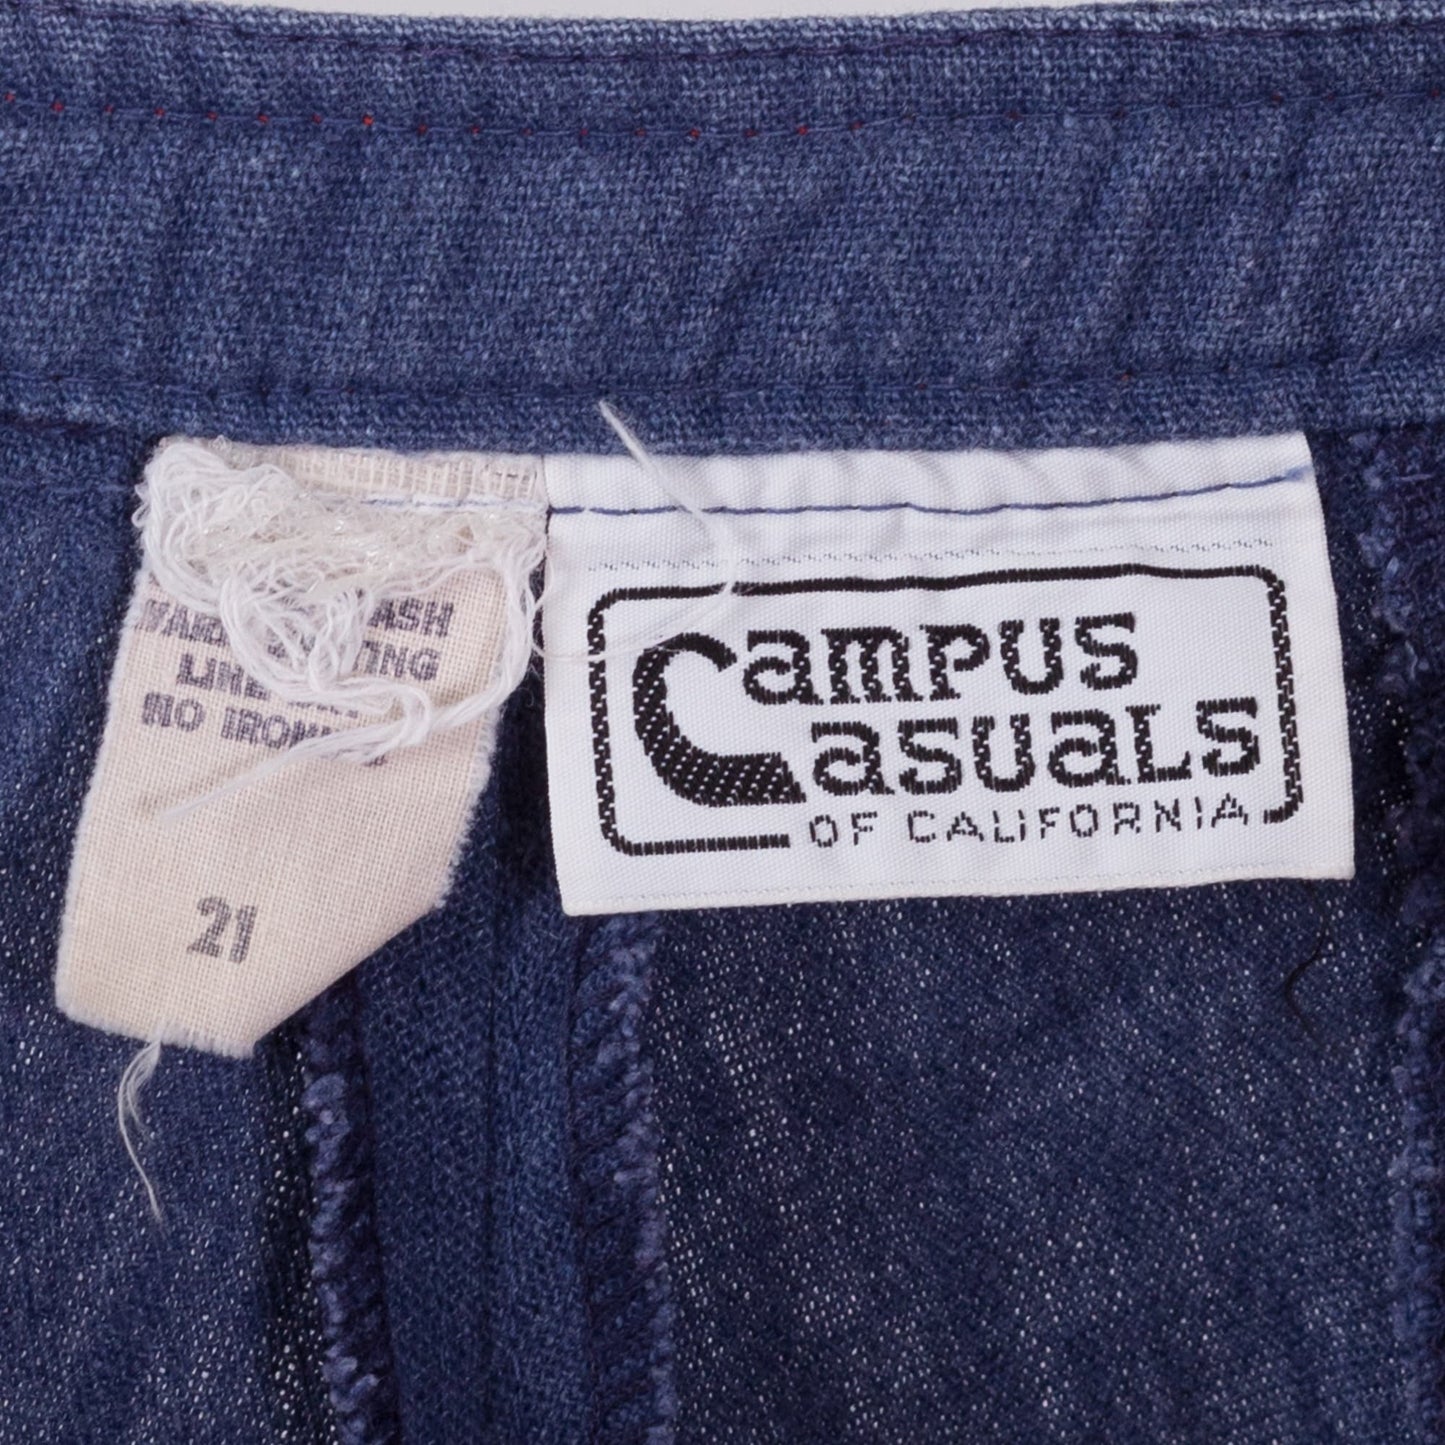 70s Retro Contrast Stitch Chambray Jeans - XS to Petite Small, 25.5" 